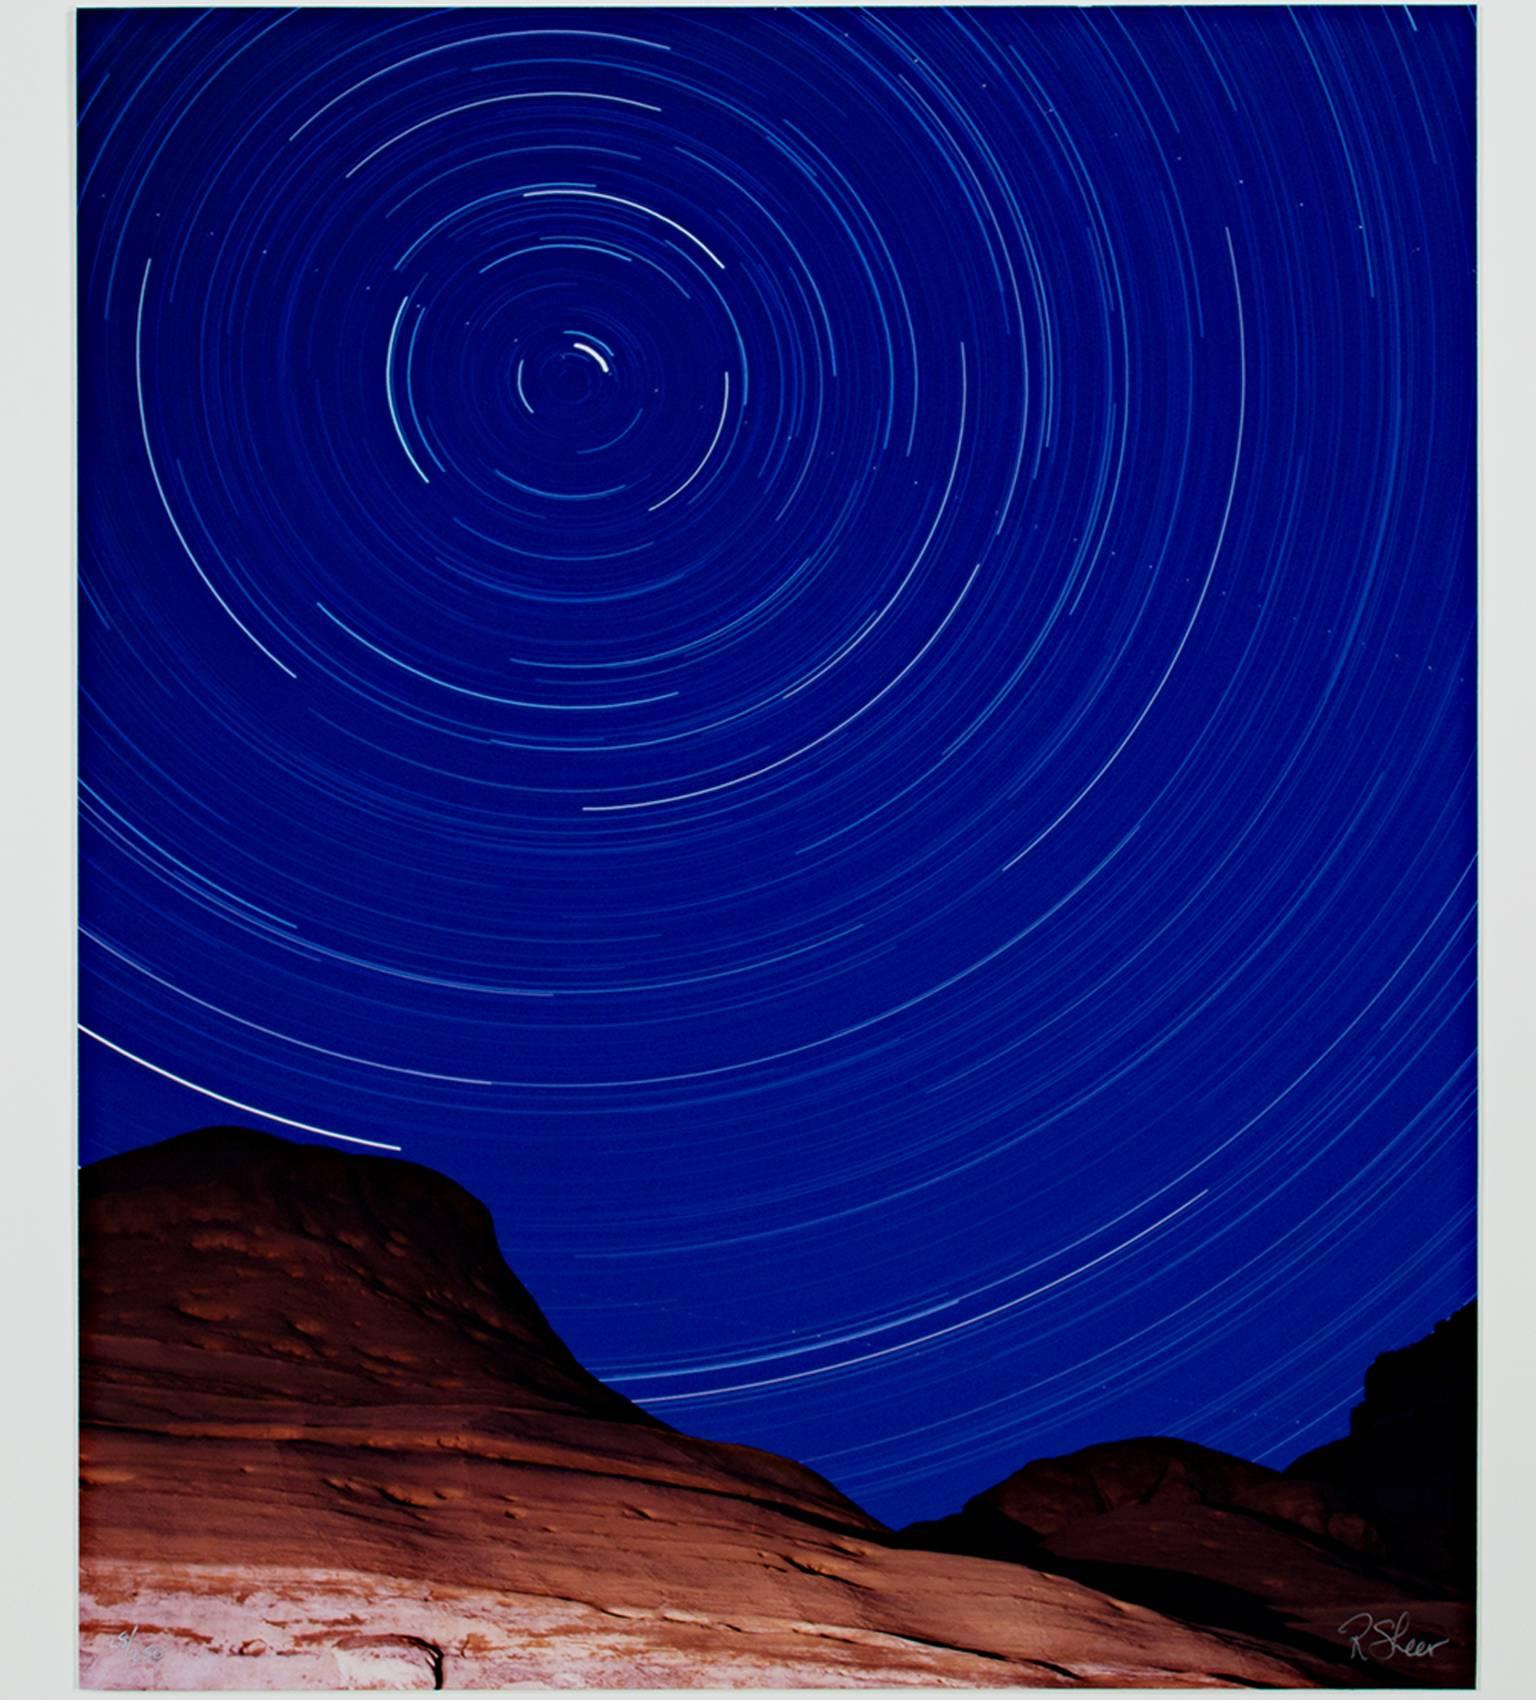 "Lake Powell Star Circles-North Star" is a long-exposure photograph by Robert Kawika Sheer. The artist signed this piece in the lower right and editioned in the lower left. Edition 28/250. This photograph depicts the stars as they circle around the